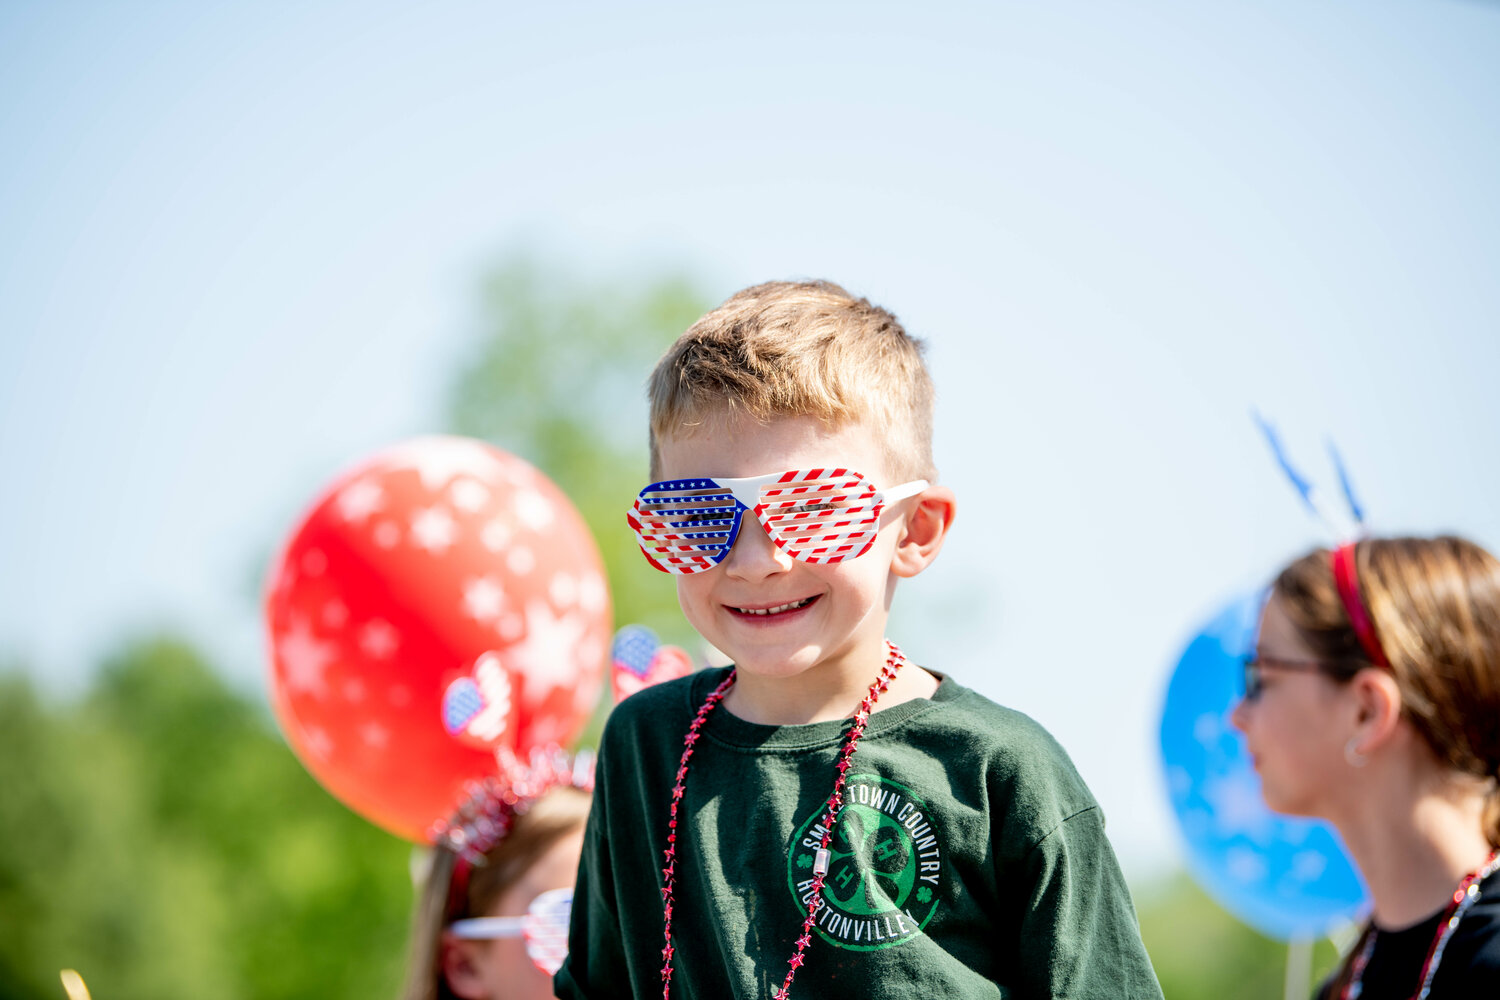 Left: Sawyer Haff grins from behind his patriotic shades on the Small Town Country 4H float.